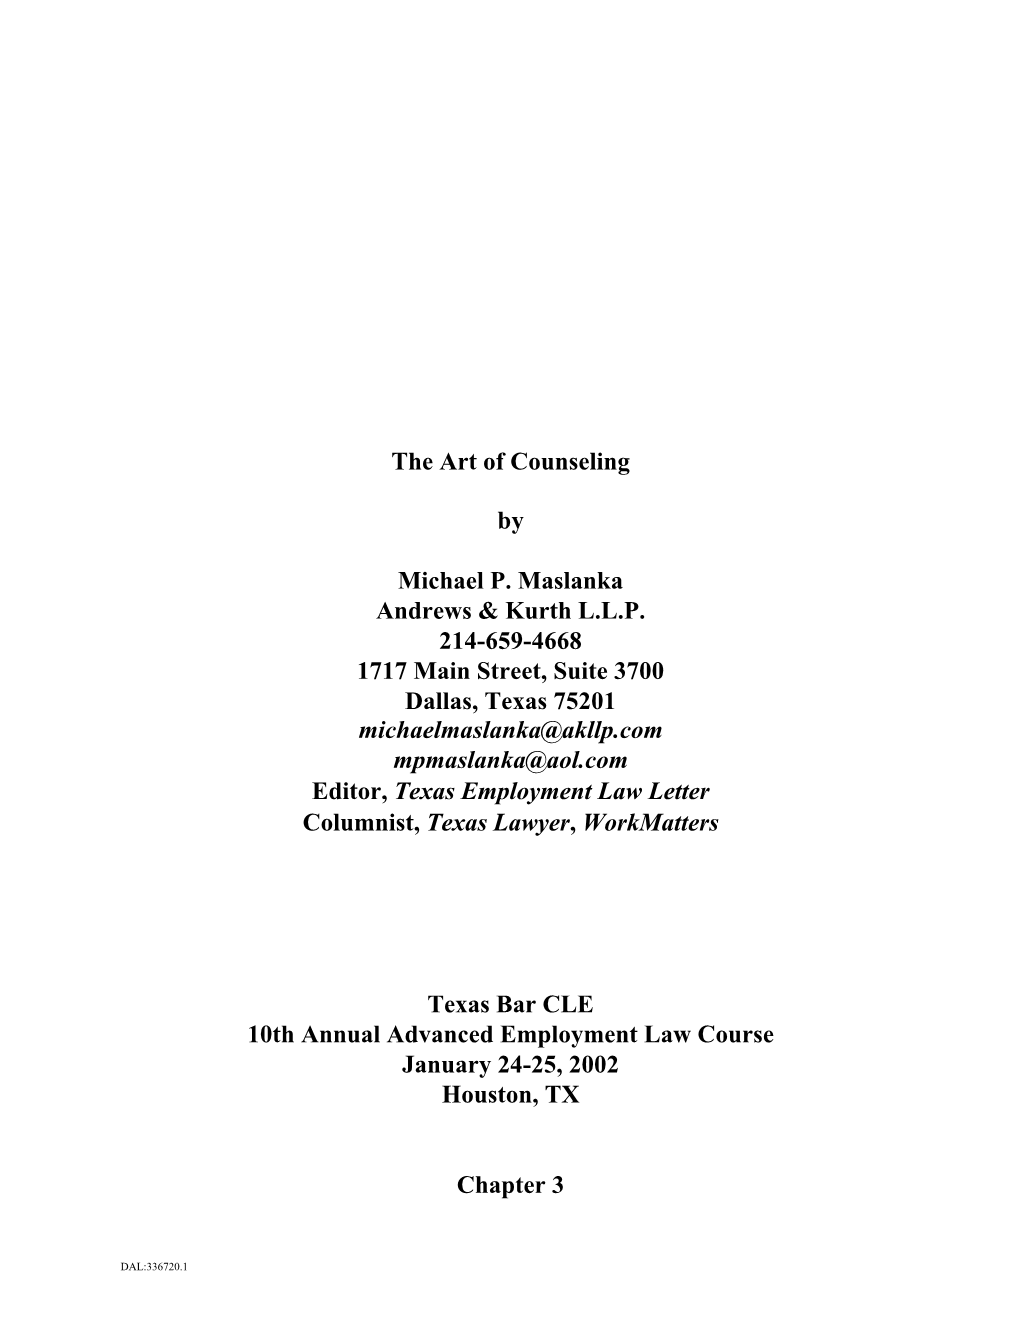 The Art of Counseling by Michael P. Maslanka Andrews & Kurth L.L.P